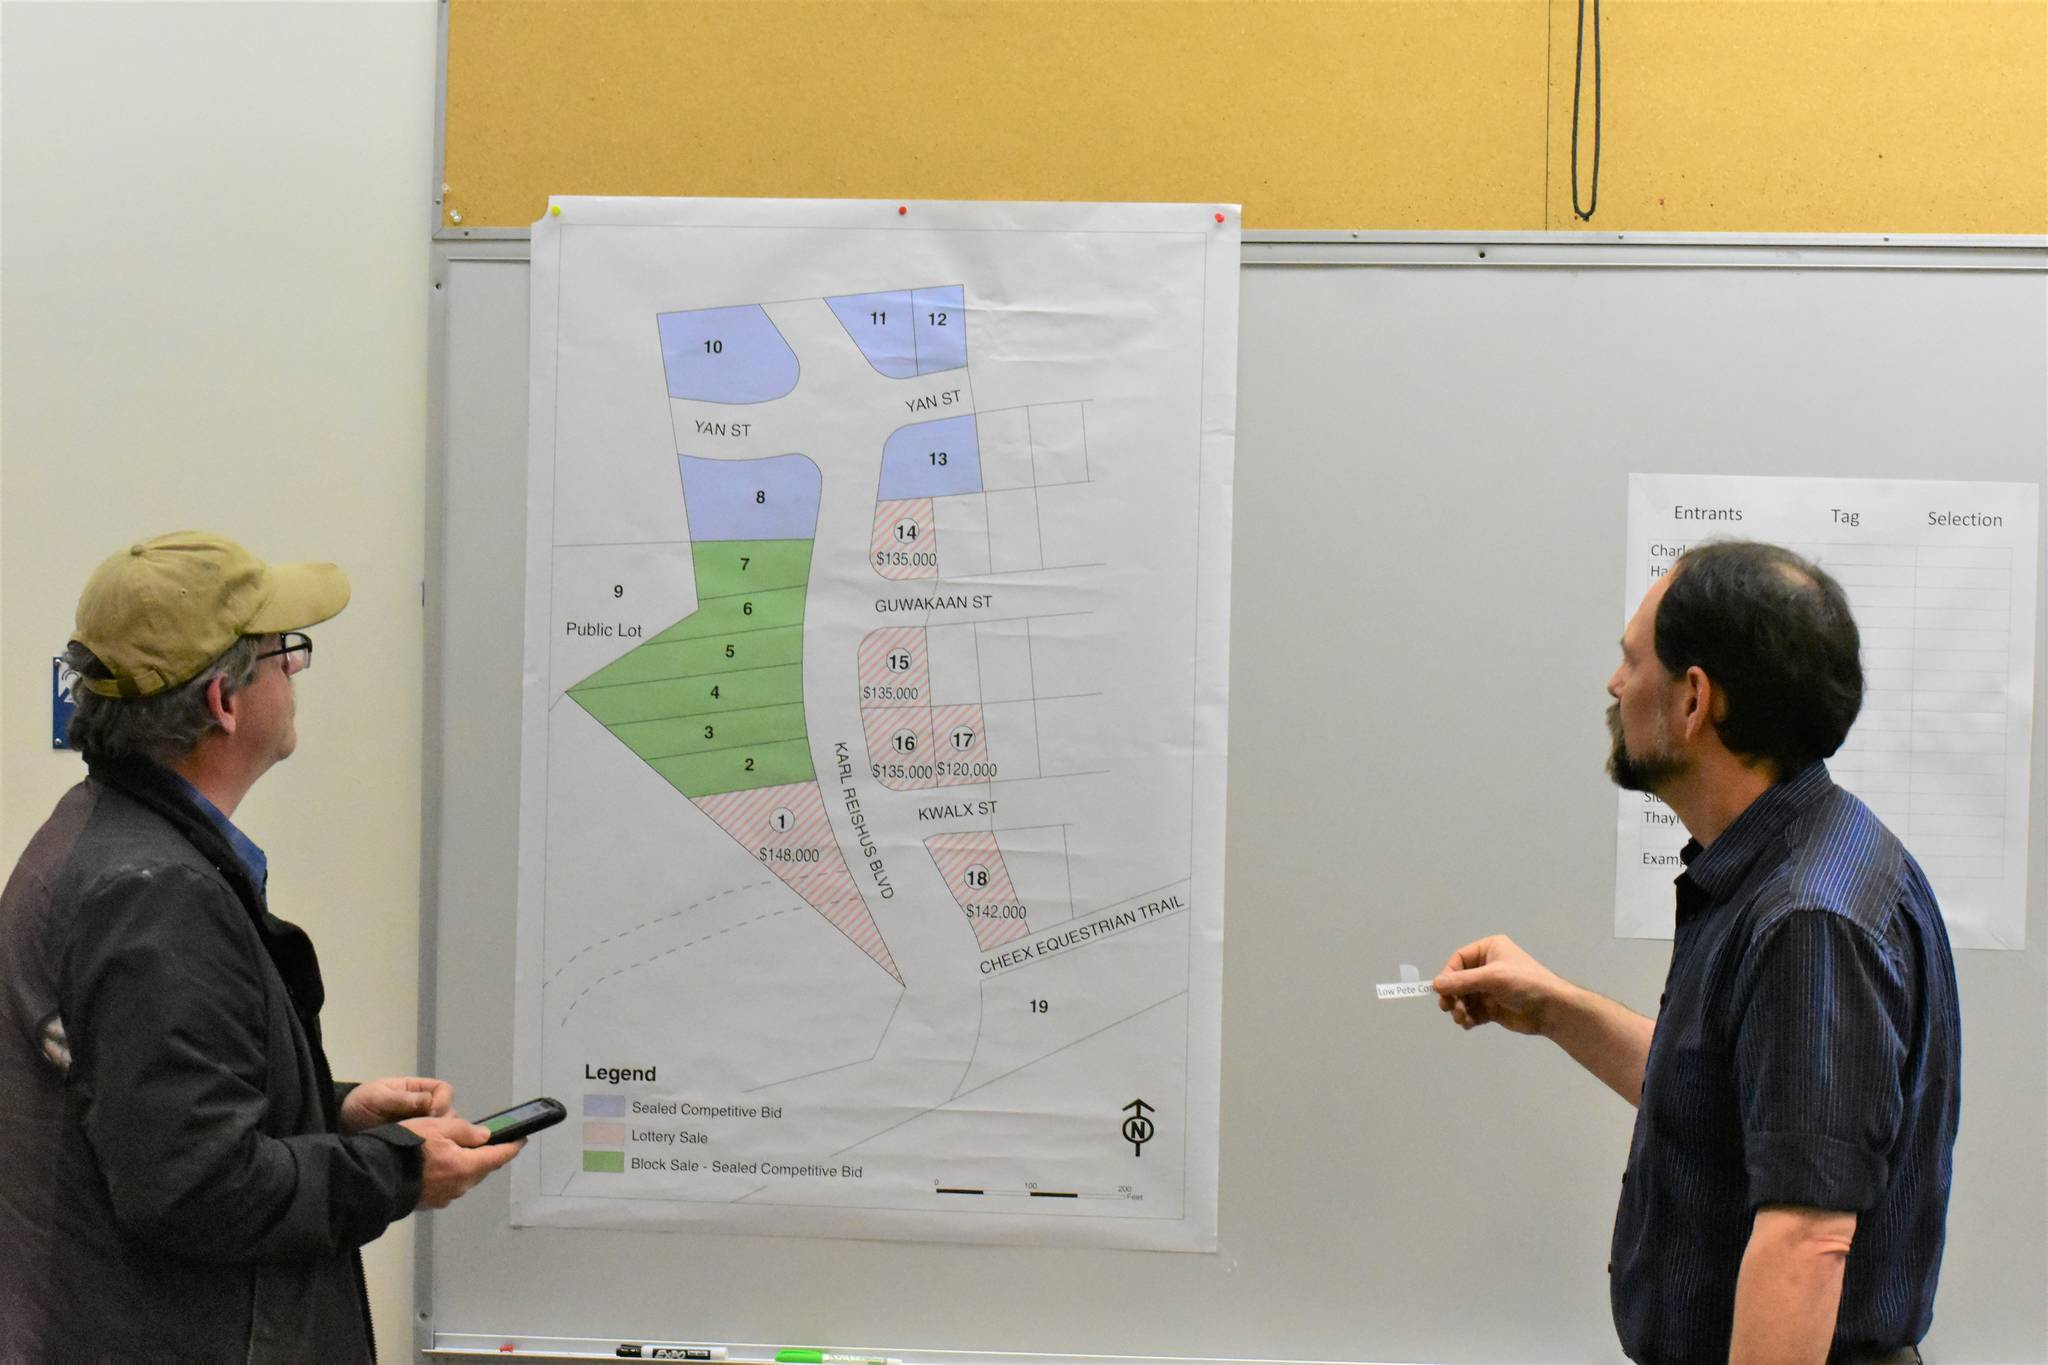 Rich Petersen of Lowpete Construction, left, gets first pick of available lots in the Pederson Hill subdivision while Land Manager Greg Chaney, right, awaits his decision at Juneau City Hall on Tuesday, Dec. 10, 2019. (Peter Segall | Juneau Empire)